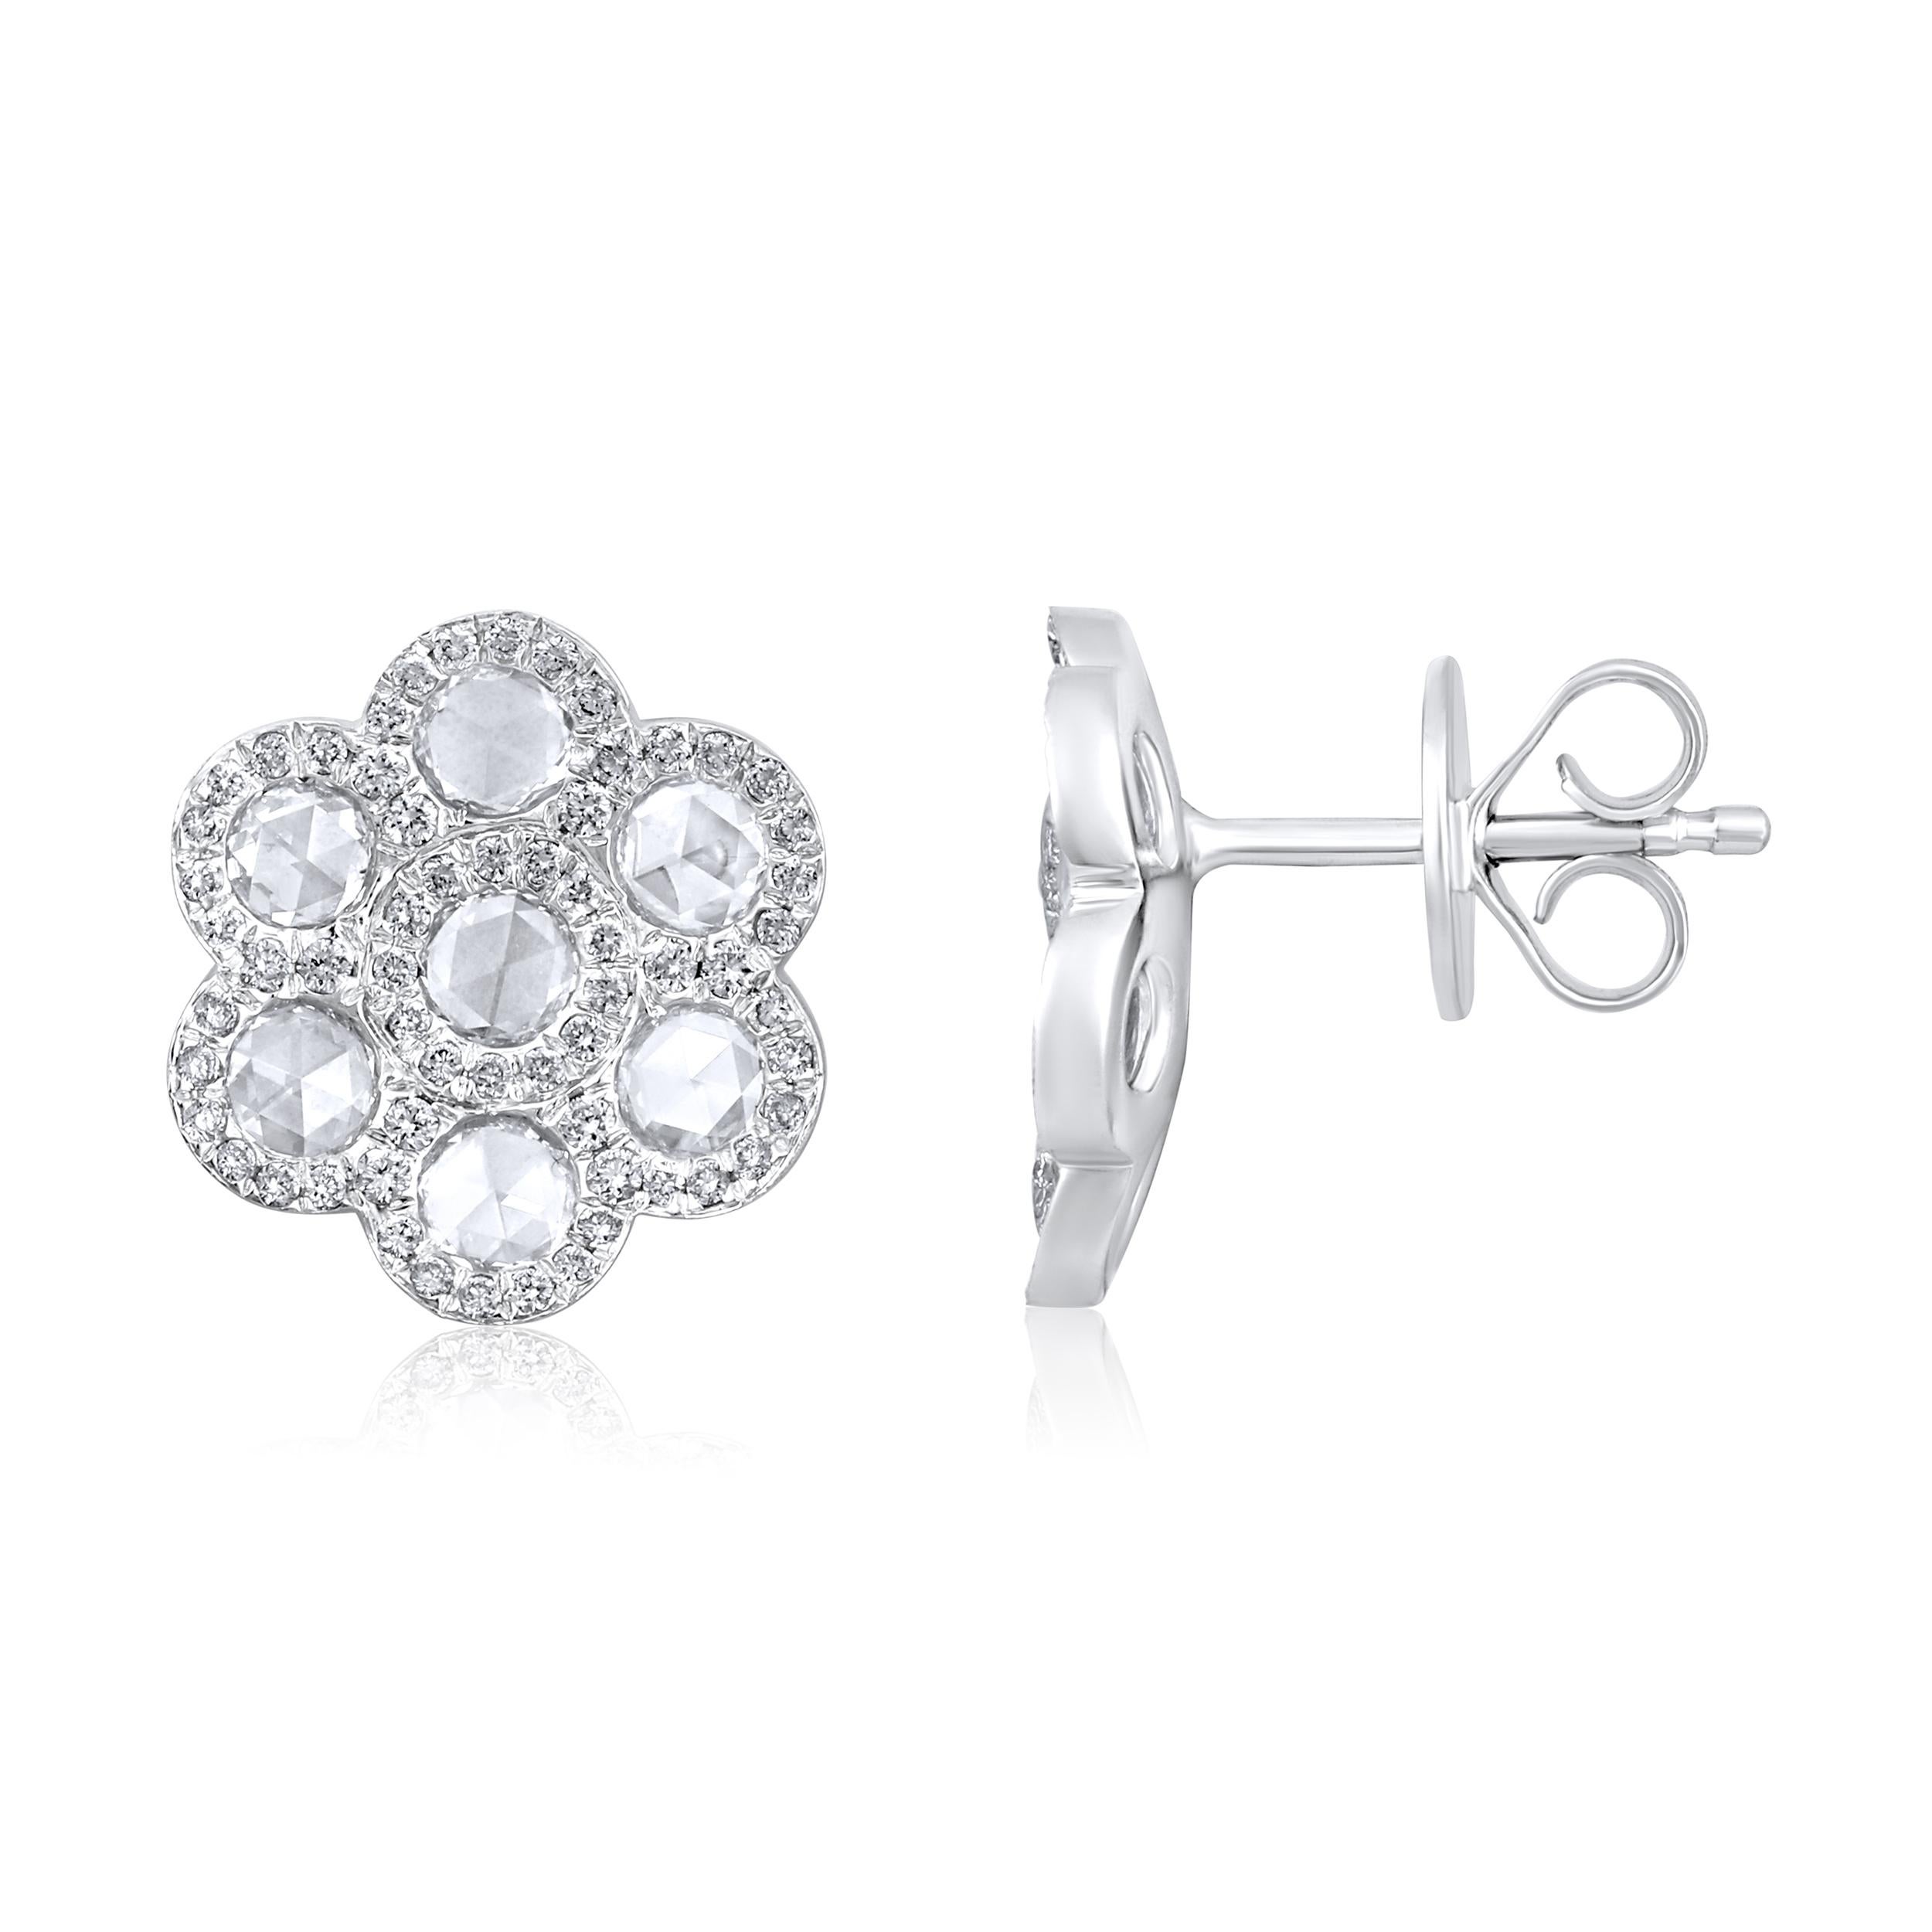 Crafted in 4.61 grams of 18K White Gold, the earrings contain 14 stones of Rose Cut Natural Diamonds with a total of 0.97 carat in E-F color and VVS-VS clarity combined with 122 stones of Round Natural Diamonds with a total of 0.37 carat in E-F